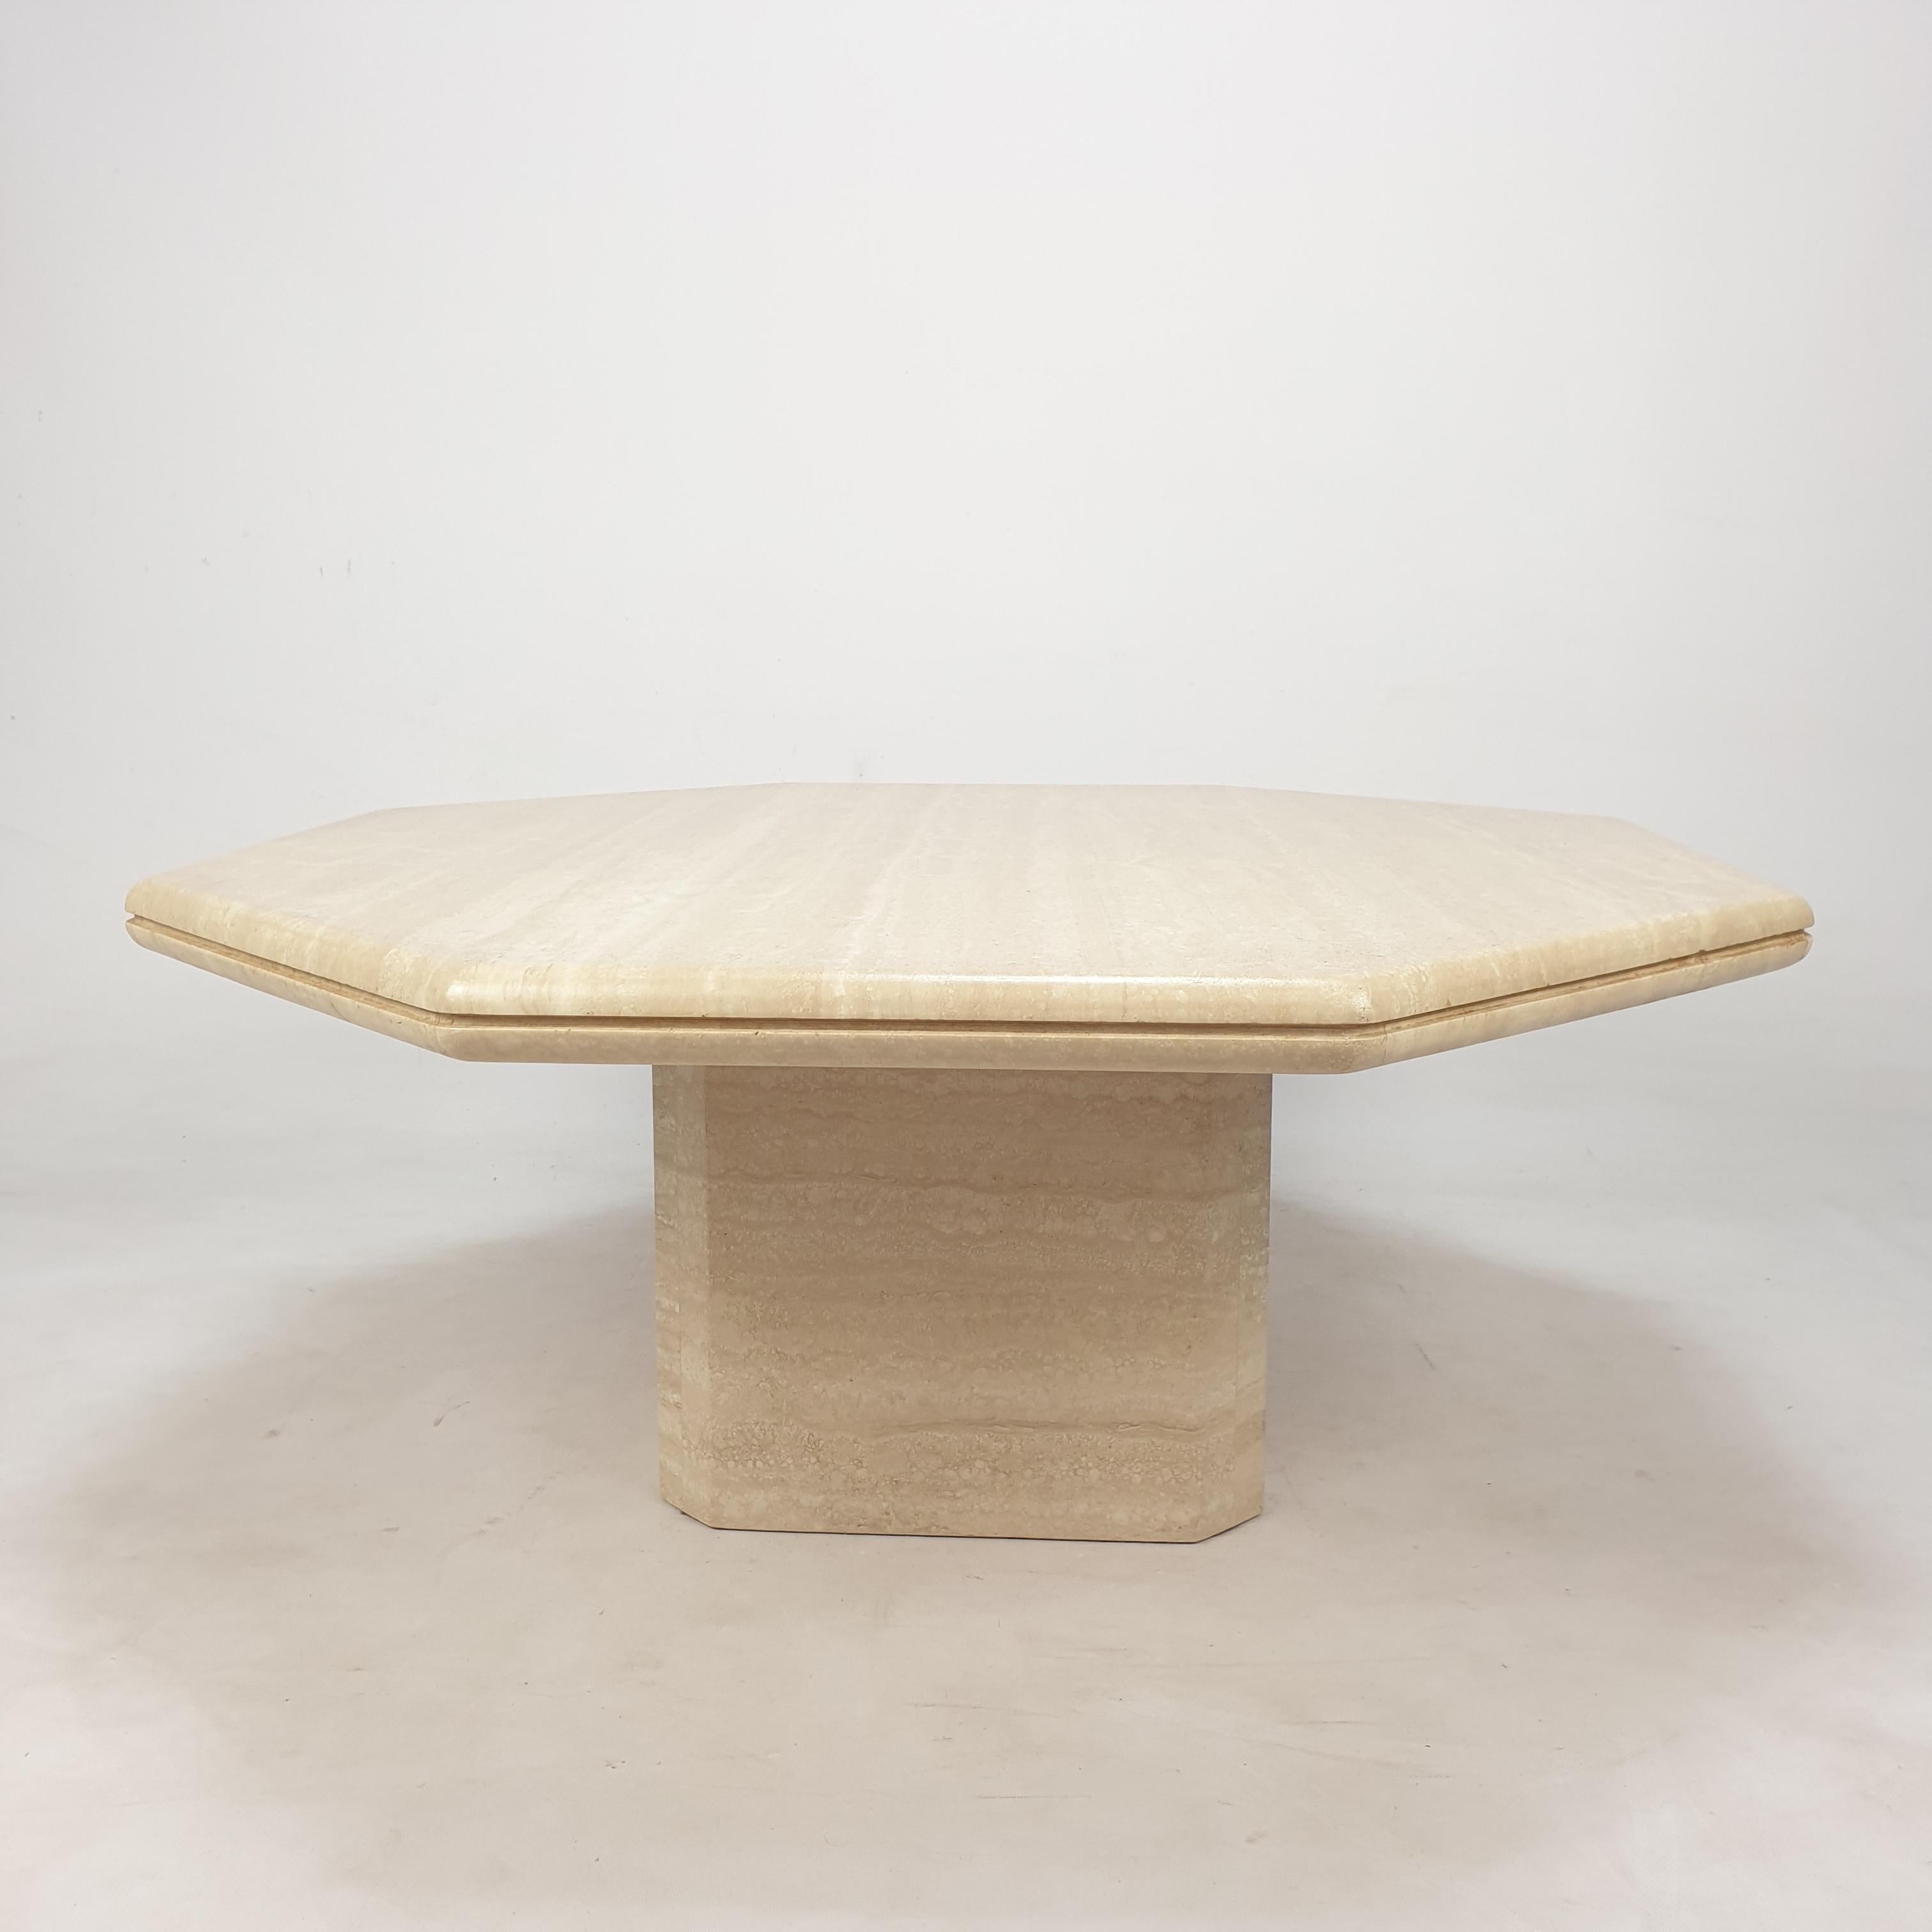 Italian Octagon Coffee Table in Travertine, 1980s For Sale 2